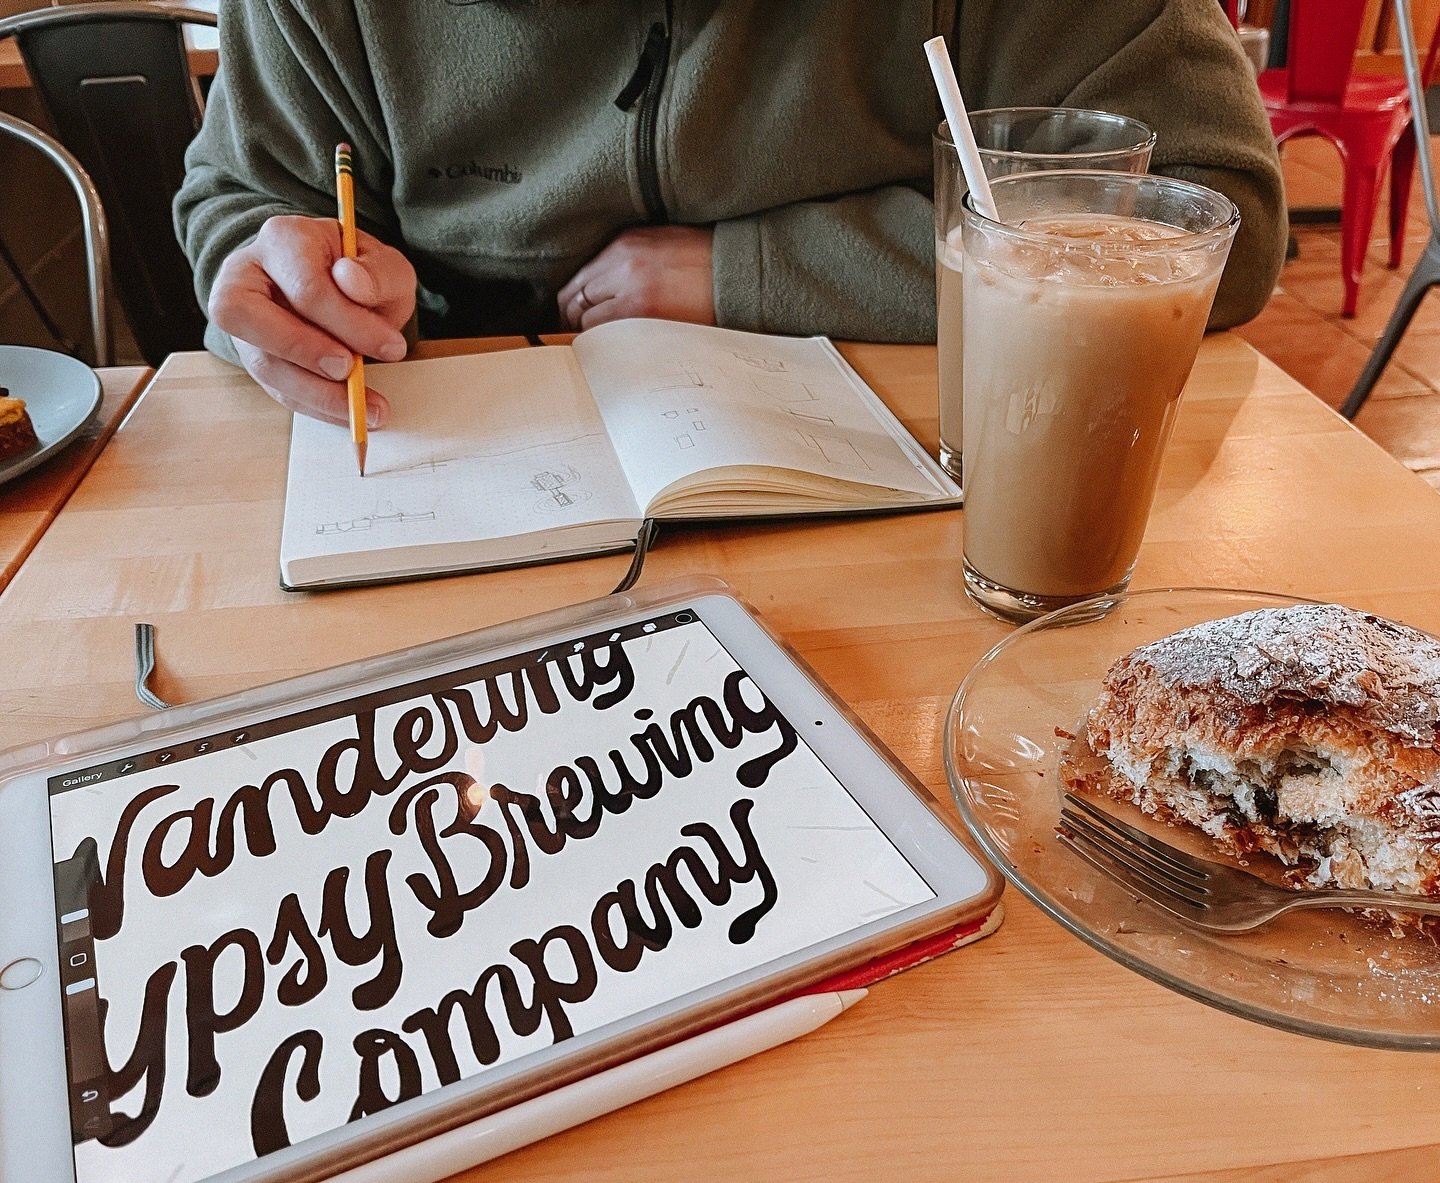 The best sketching happens when you&rsquo;re parked next to a hefty croissant and a maple latte. Spent this early rainy morning drawing summery funky type for @wanderinggypsybrewingco ✨